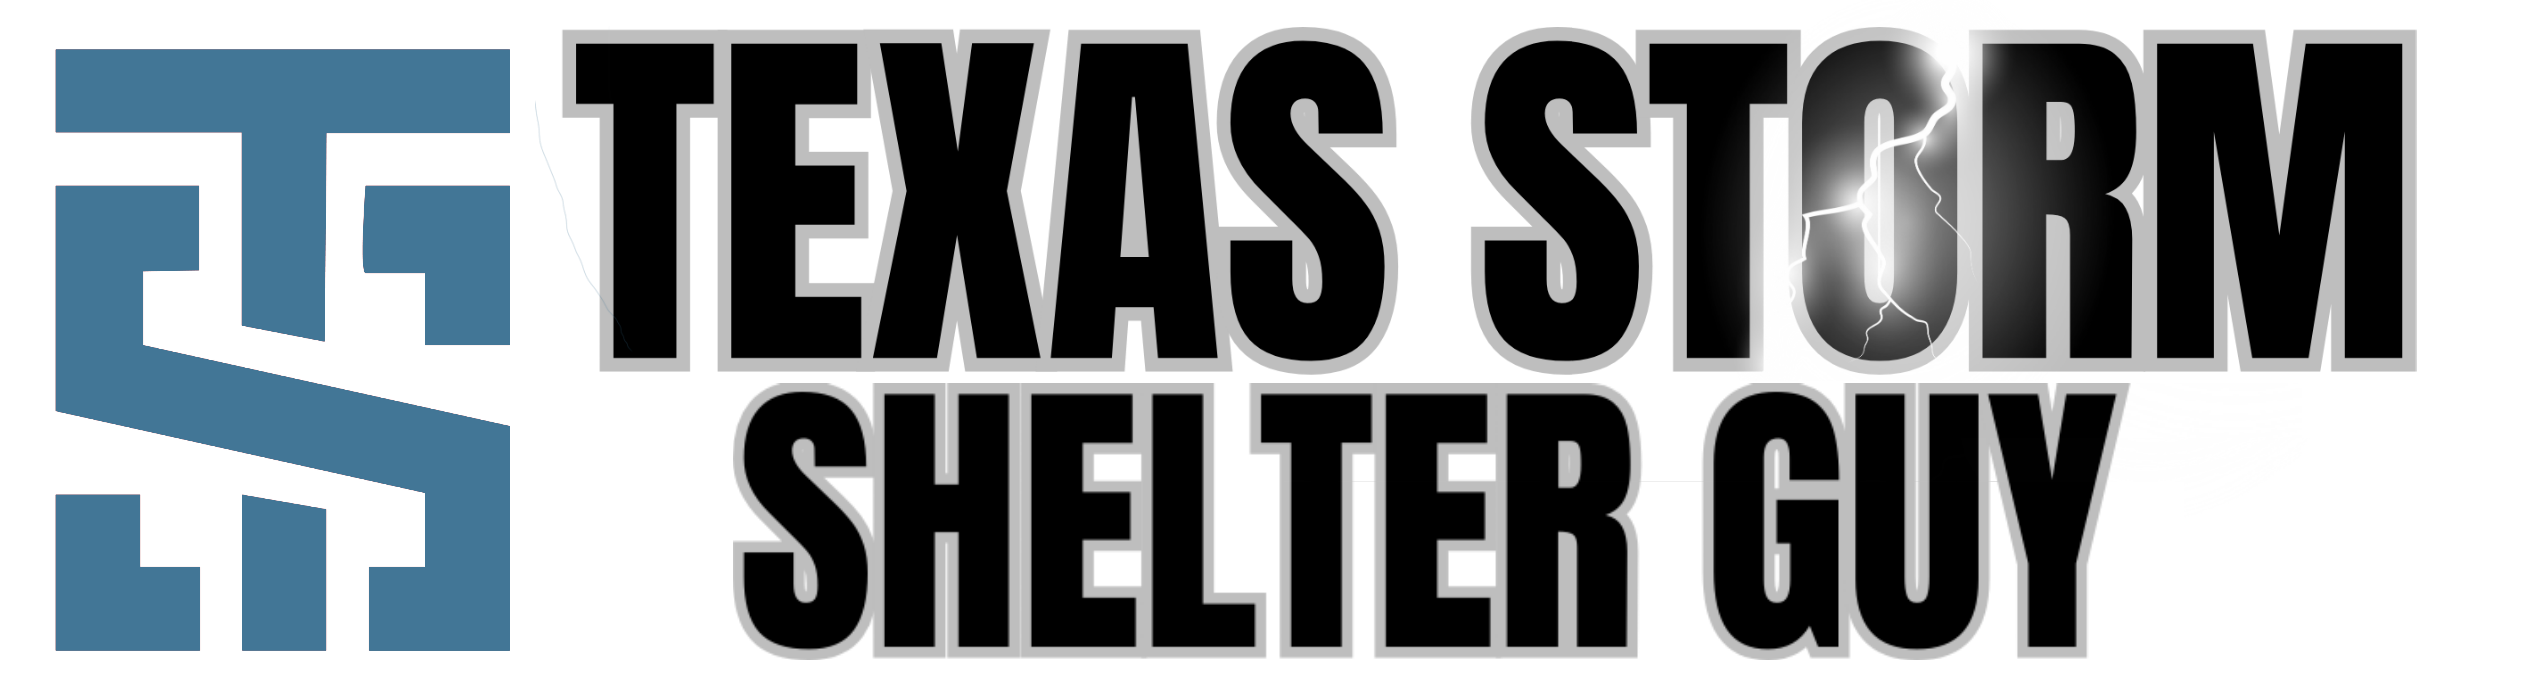 The Texas storm shelter guy logo features an underground fiberglass or steel safe room.